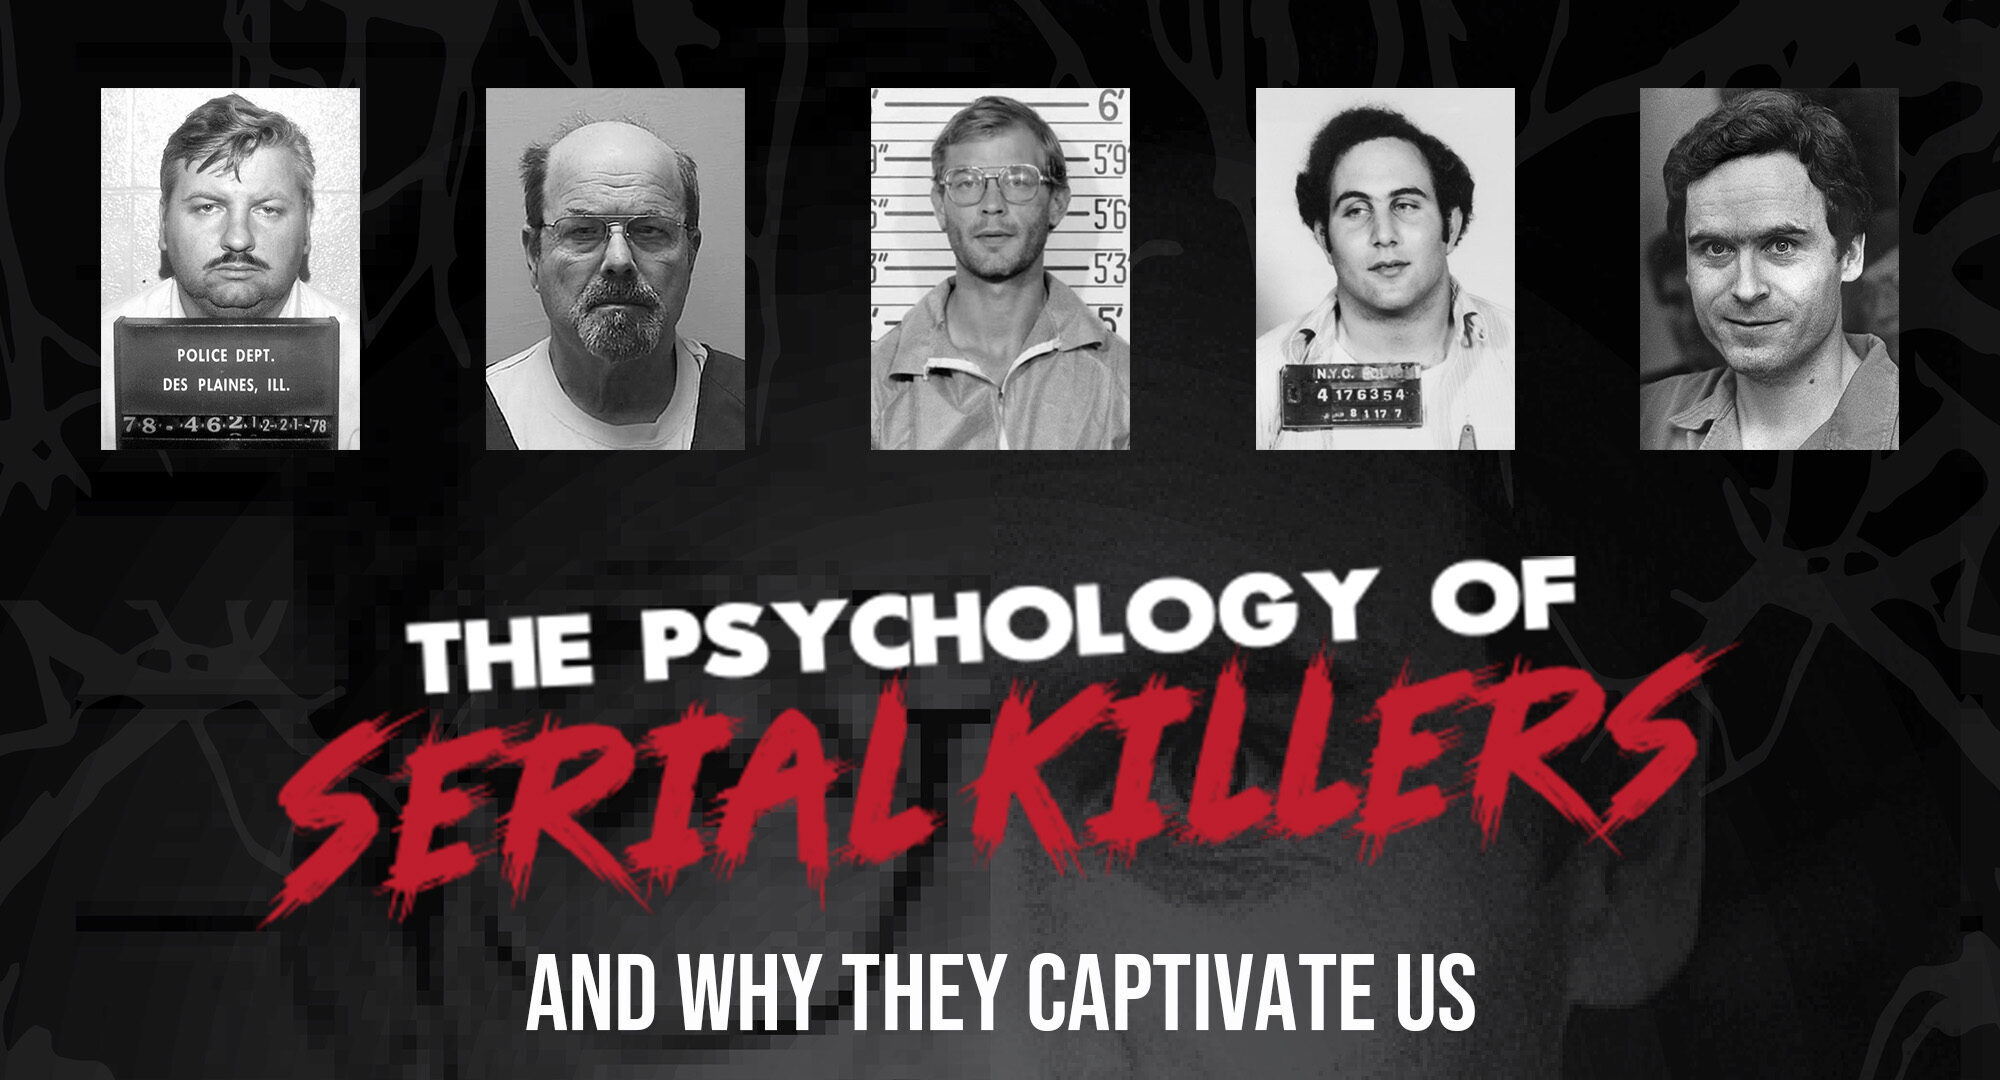 Advertisement graphic for The Psychology of Serial Killers lecture